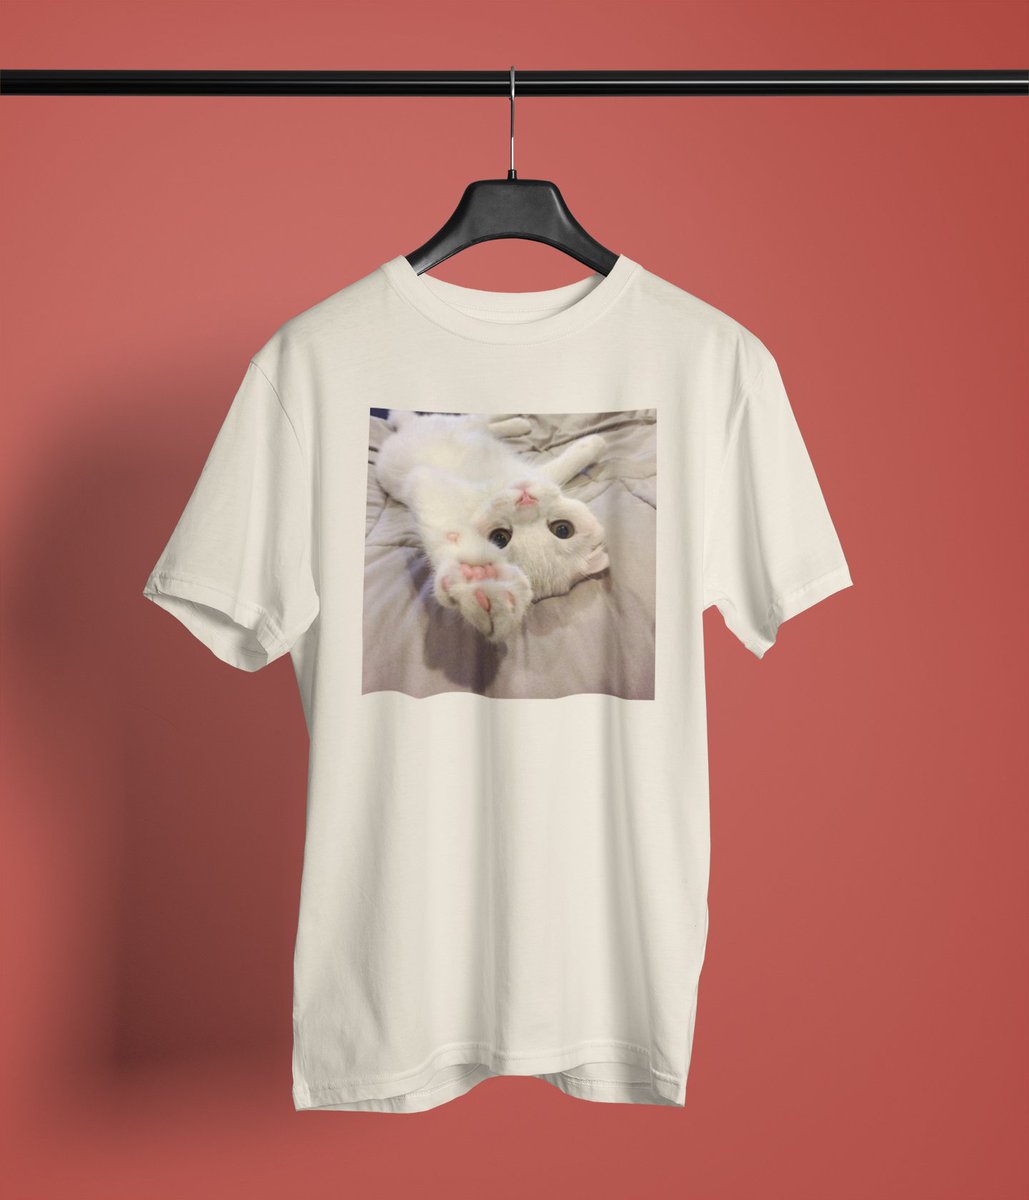 Here's a thread of wholesome t-shirt requests we received on our design tool 🥰

#CatsOfTwitter #catgirl #CatsAreFamily #Caturday #cattshirts #tshirtdesigns #CatsOnTwitter #CatsLover #redesyn